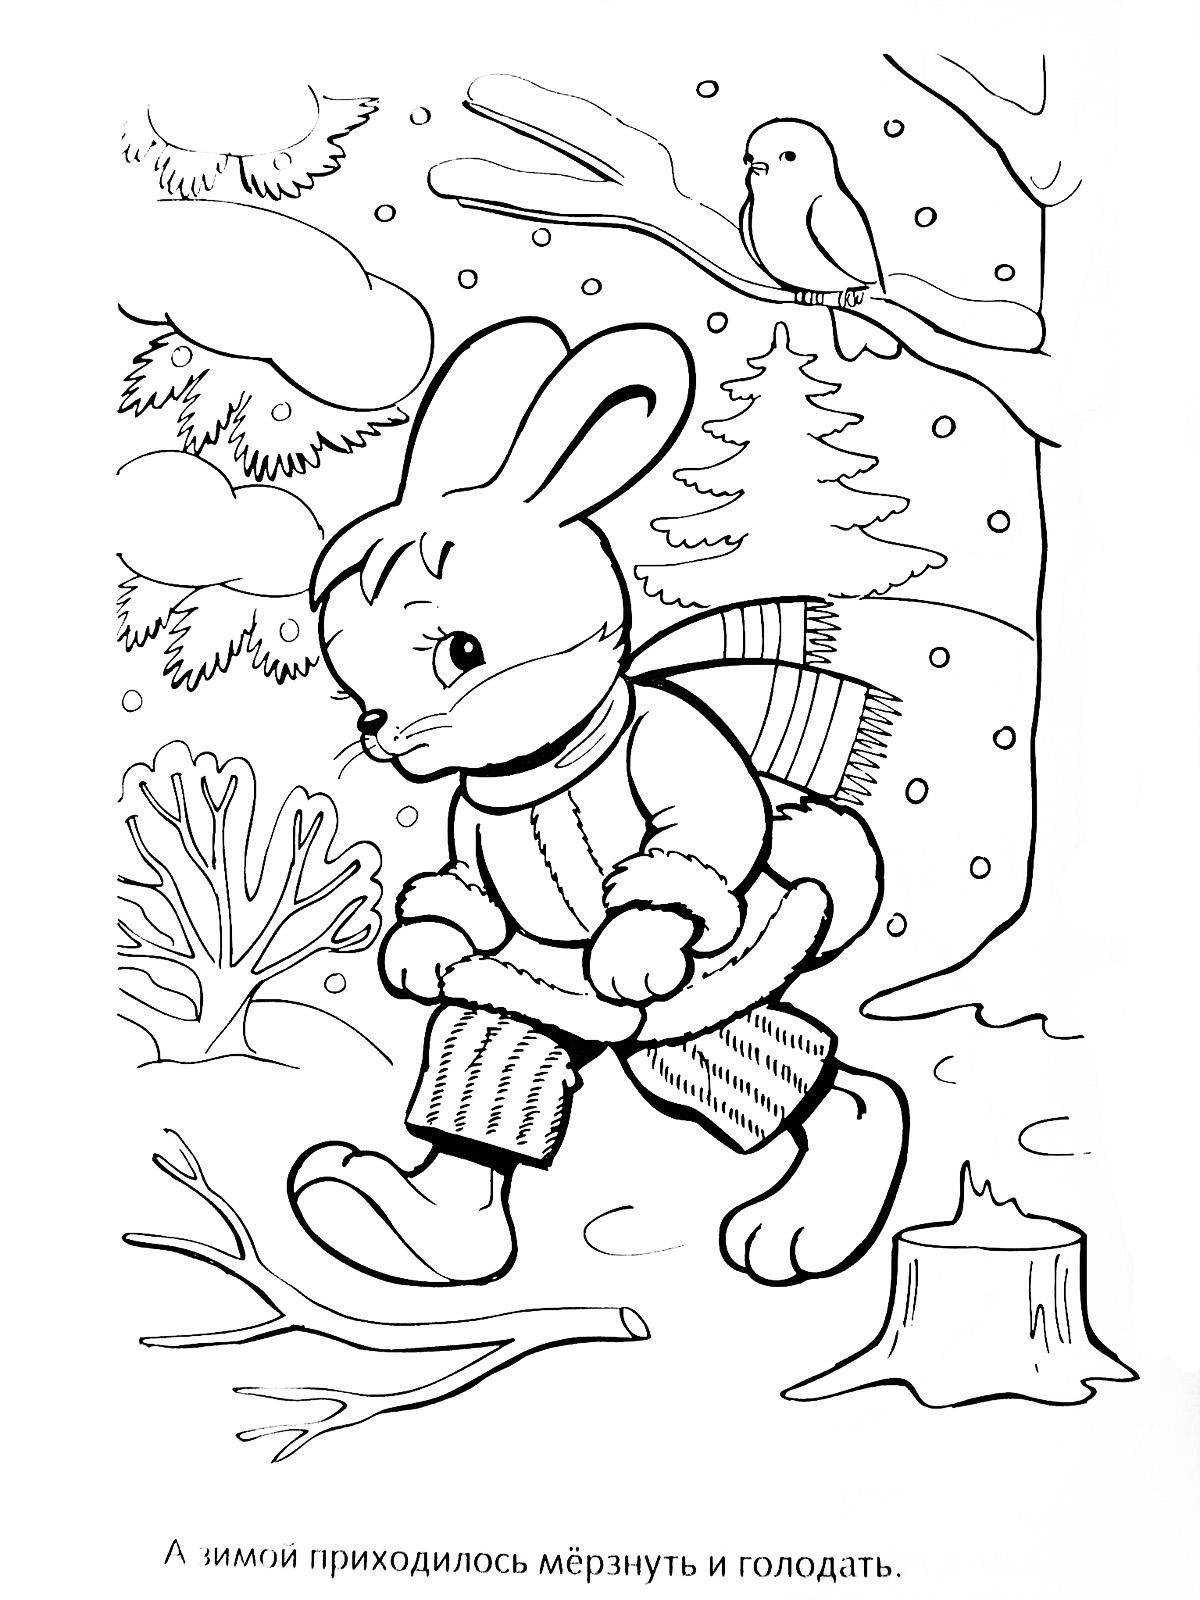 Coloring The figure of the hare in winter forest. Category Pets allowed. Tags:  hare, rabbit.